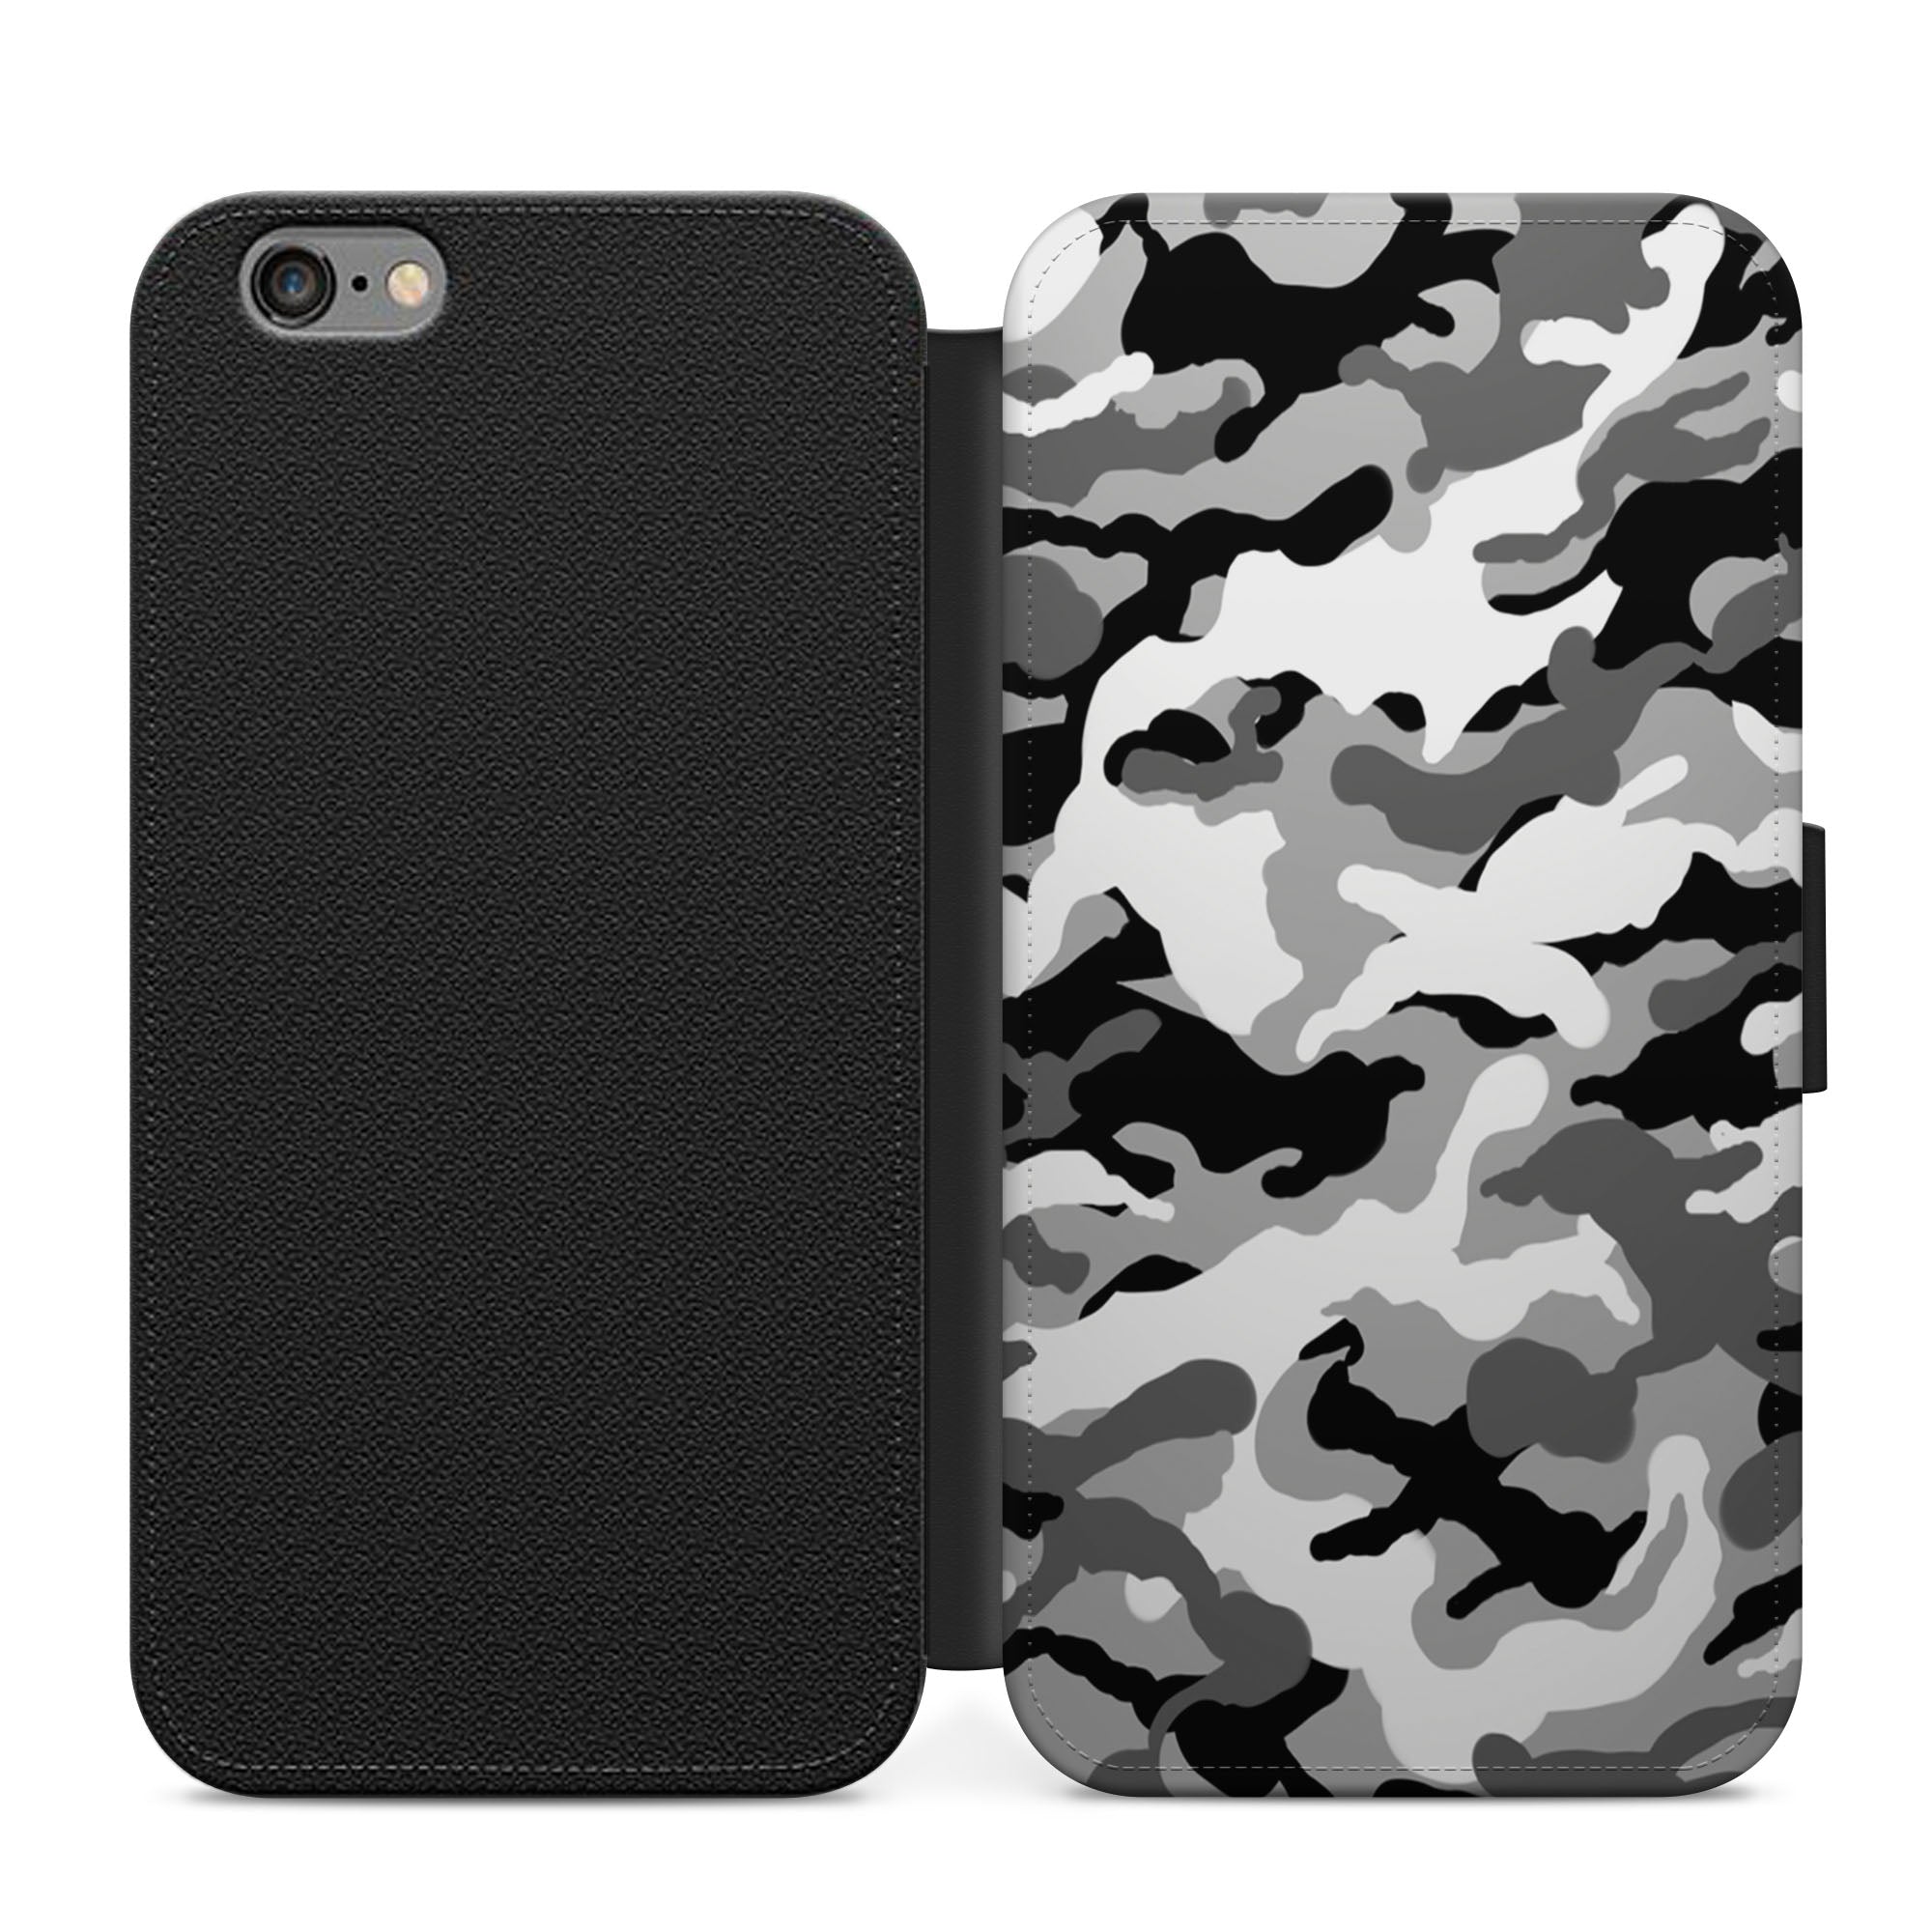 Arctic Snow Camo Camouflage Faux Leather Flip Case Wallet for iPhone / Samsung